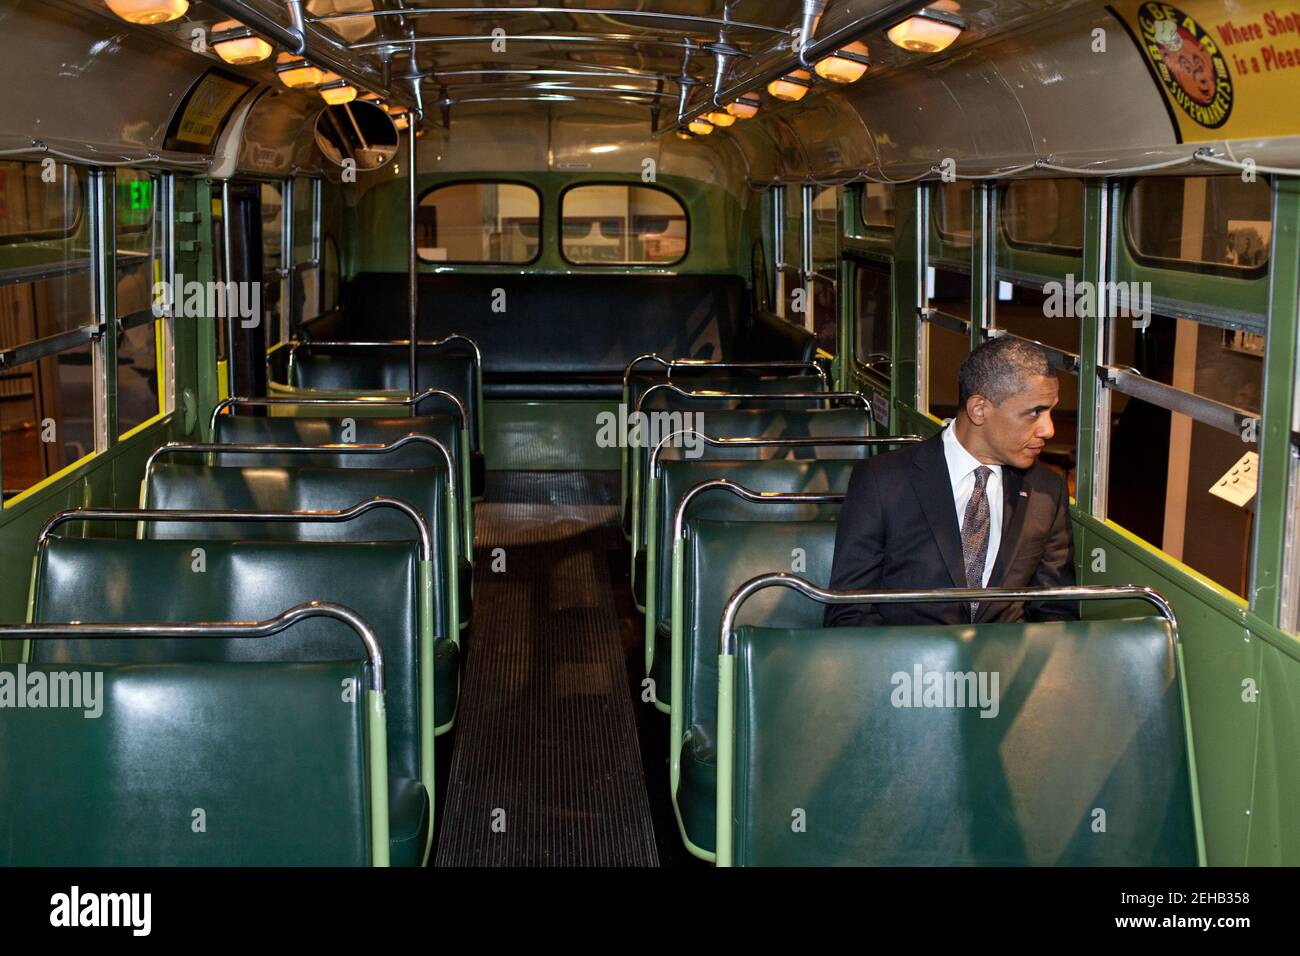 President Barack Obama sits on the famed Rosa Parks bus at the Henry Ford Museum following an event in Dearborn, Michigan, April 18, 2012. Stock Photo